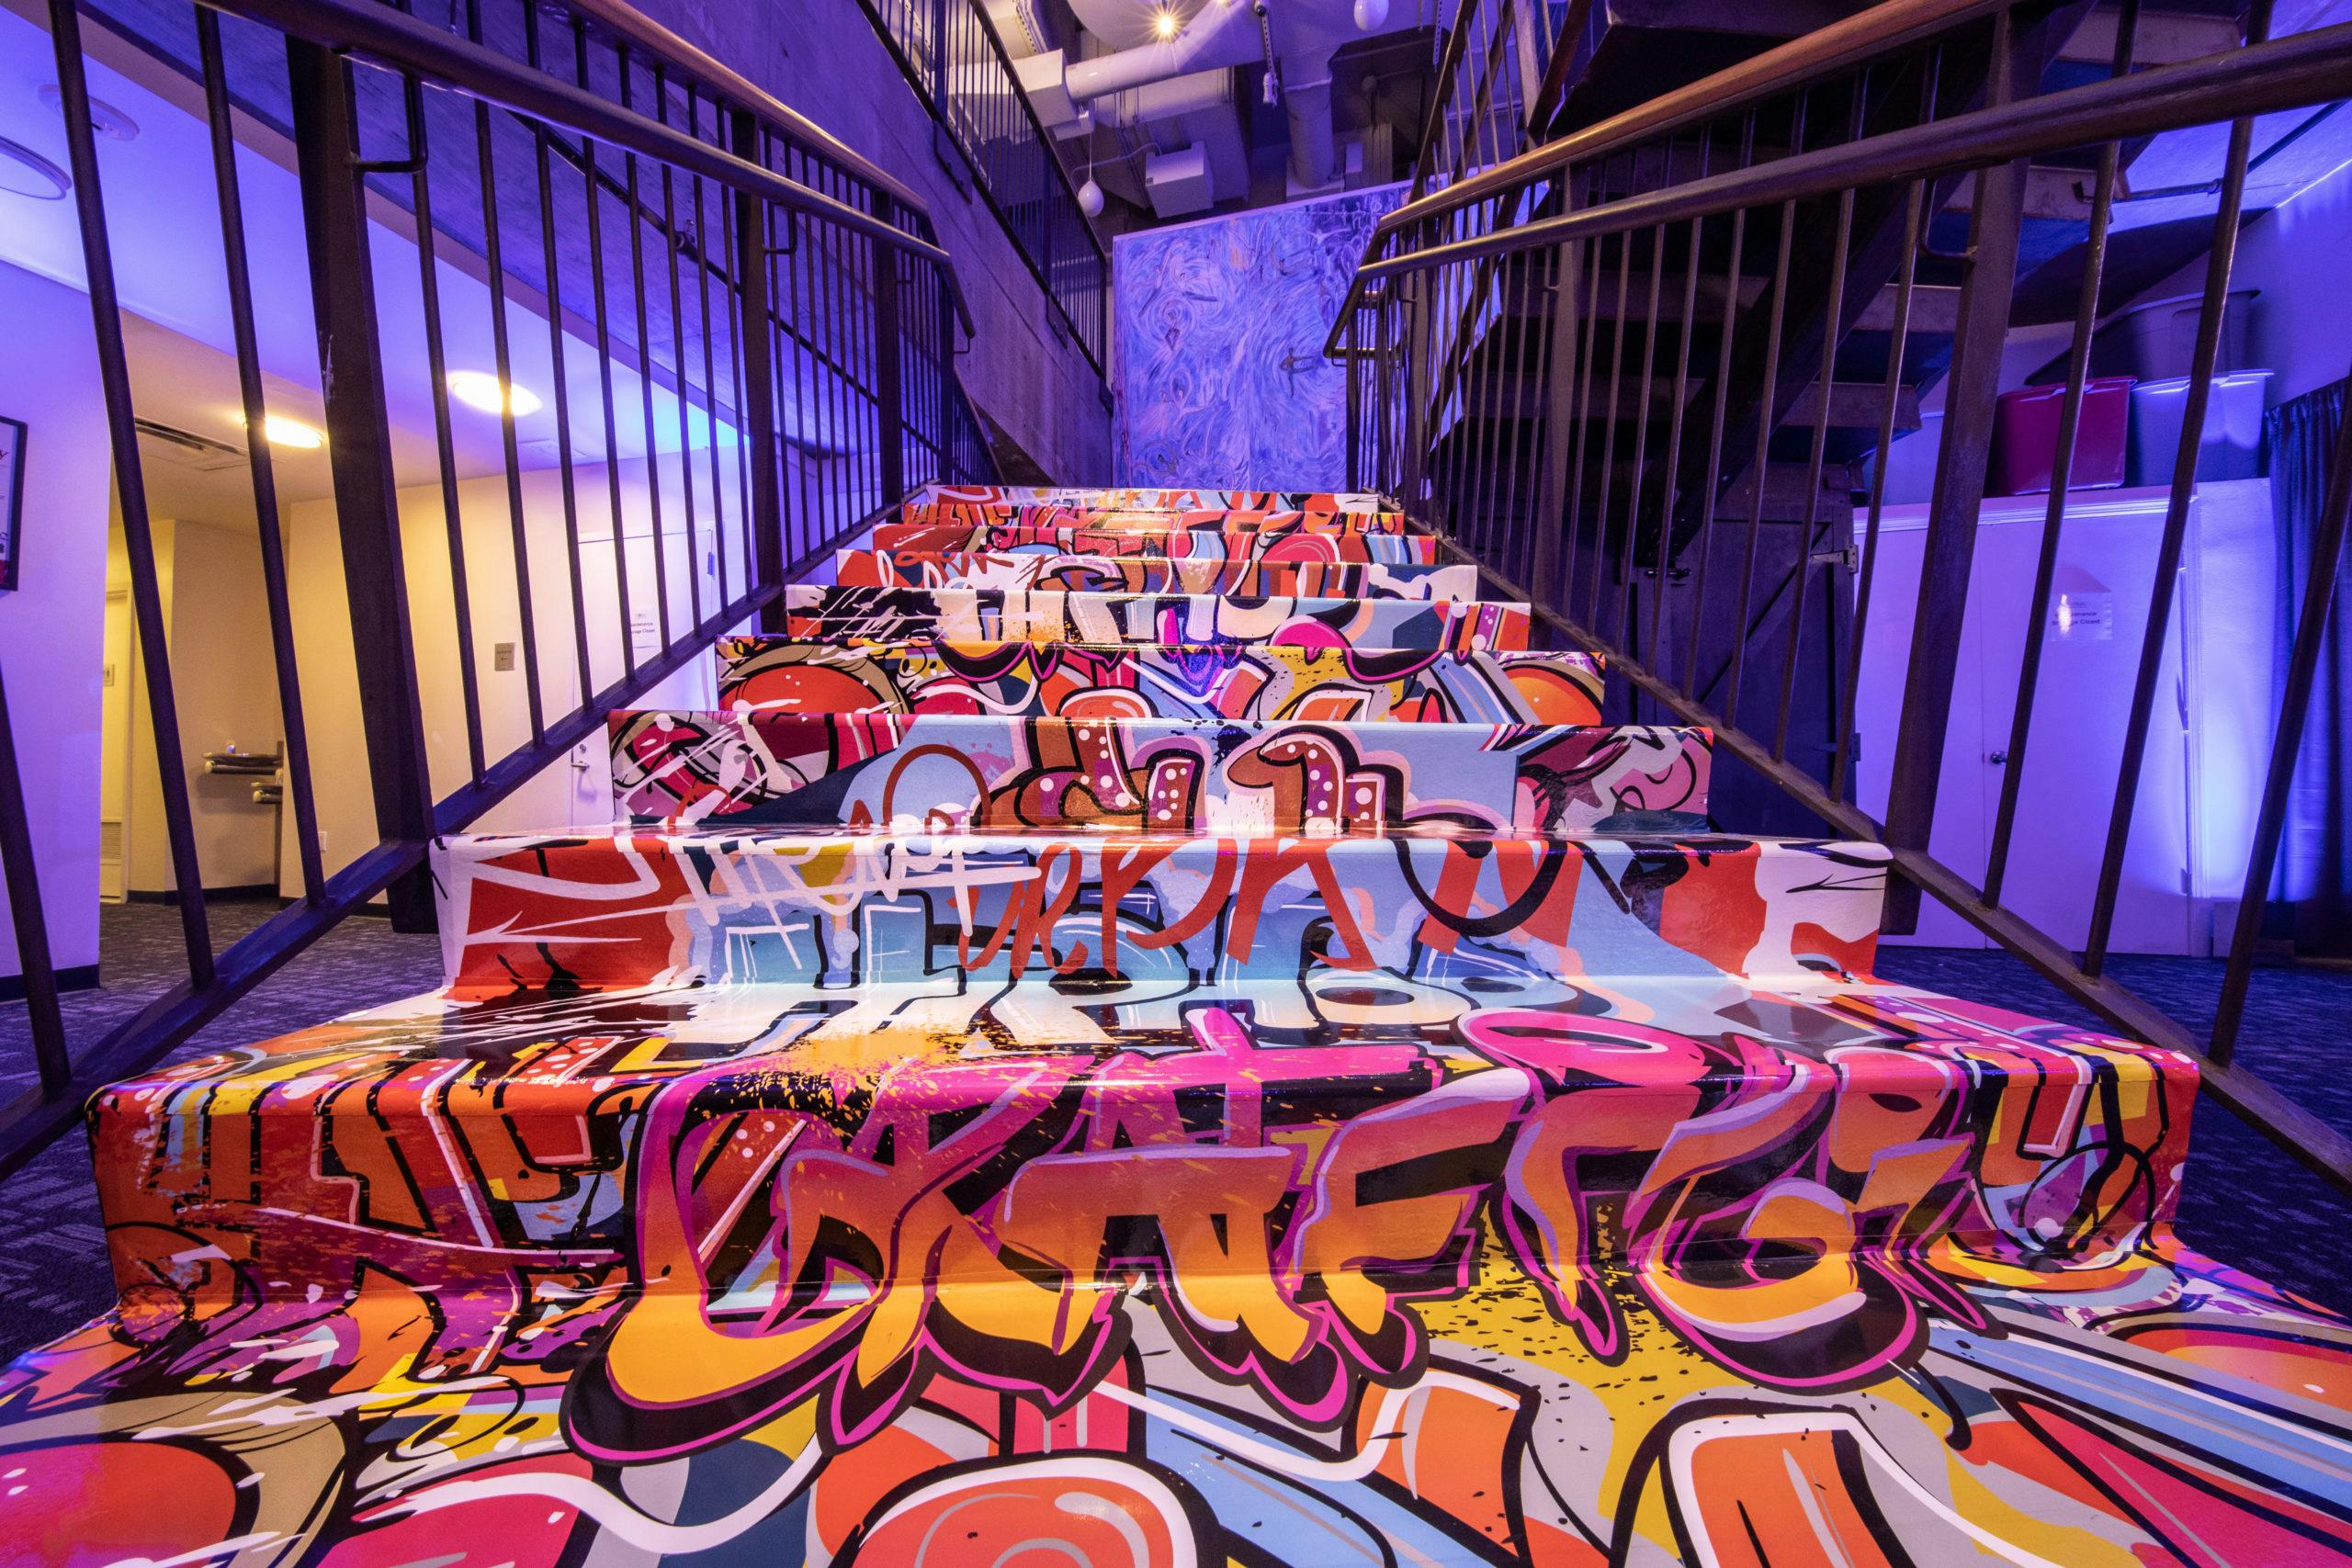 Hip Hop Graffiti Themed Kids Birthday Bash at Manhattan Movement + Art Center in New York with Graffiti on the Stairs and Walls | PartySlate